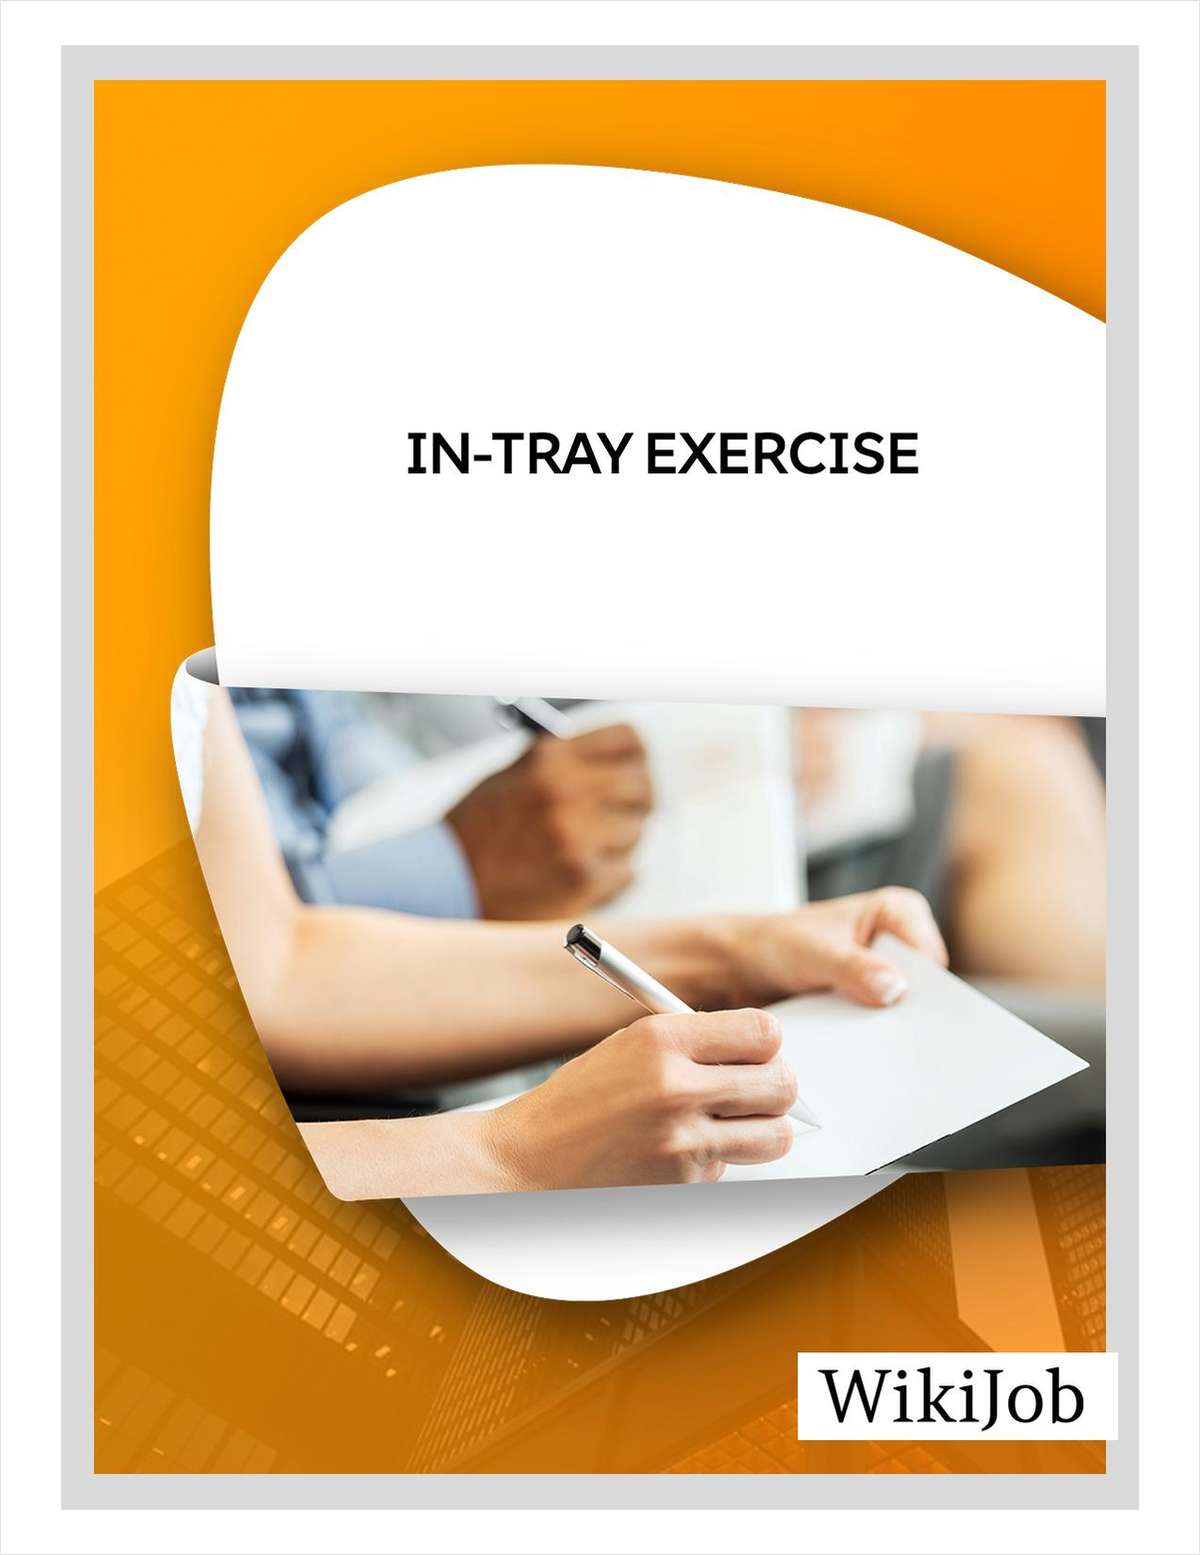 In-Tray Exercise